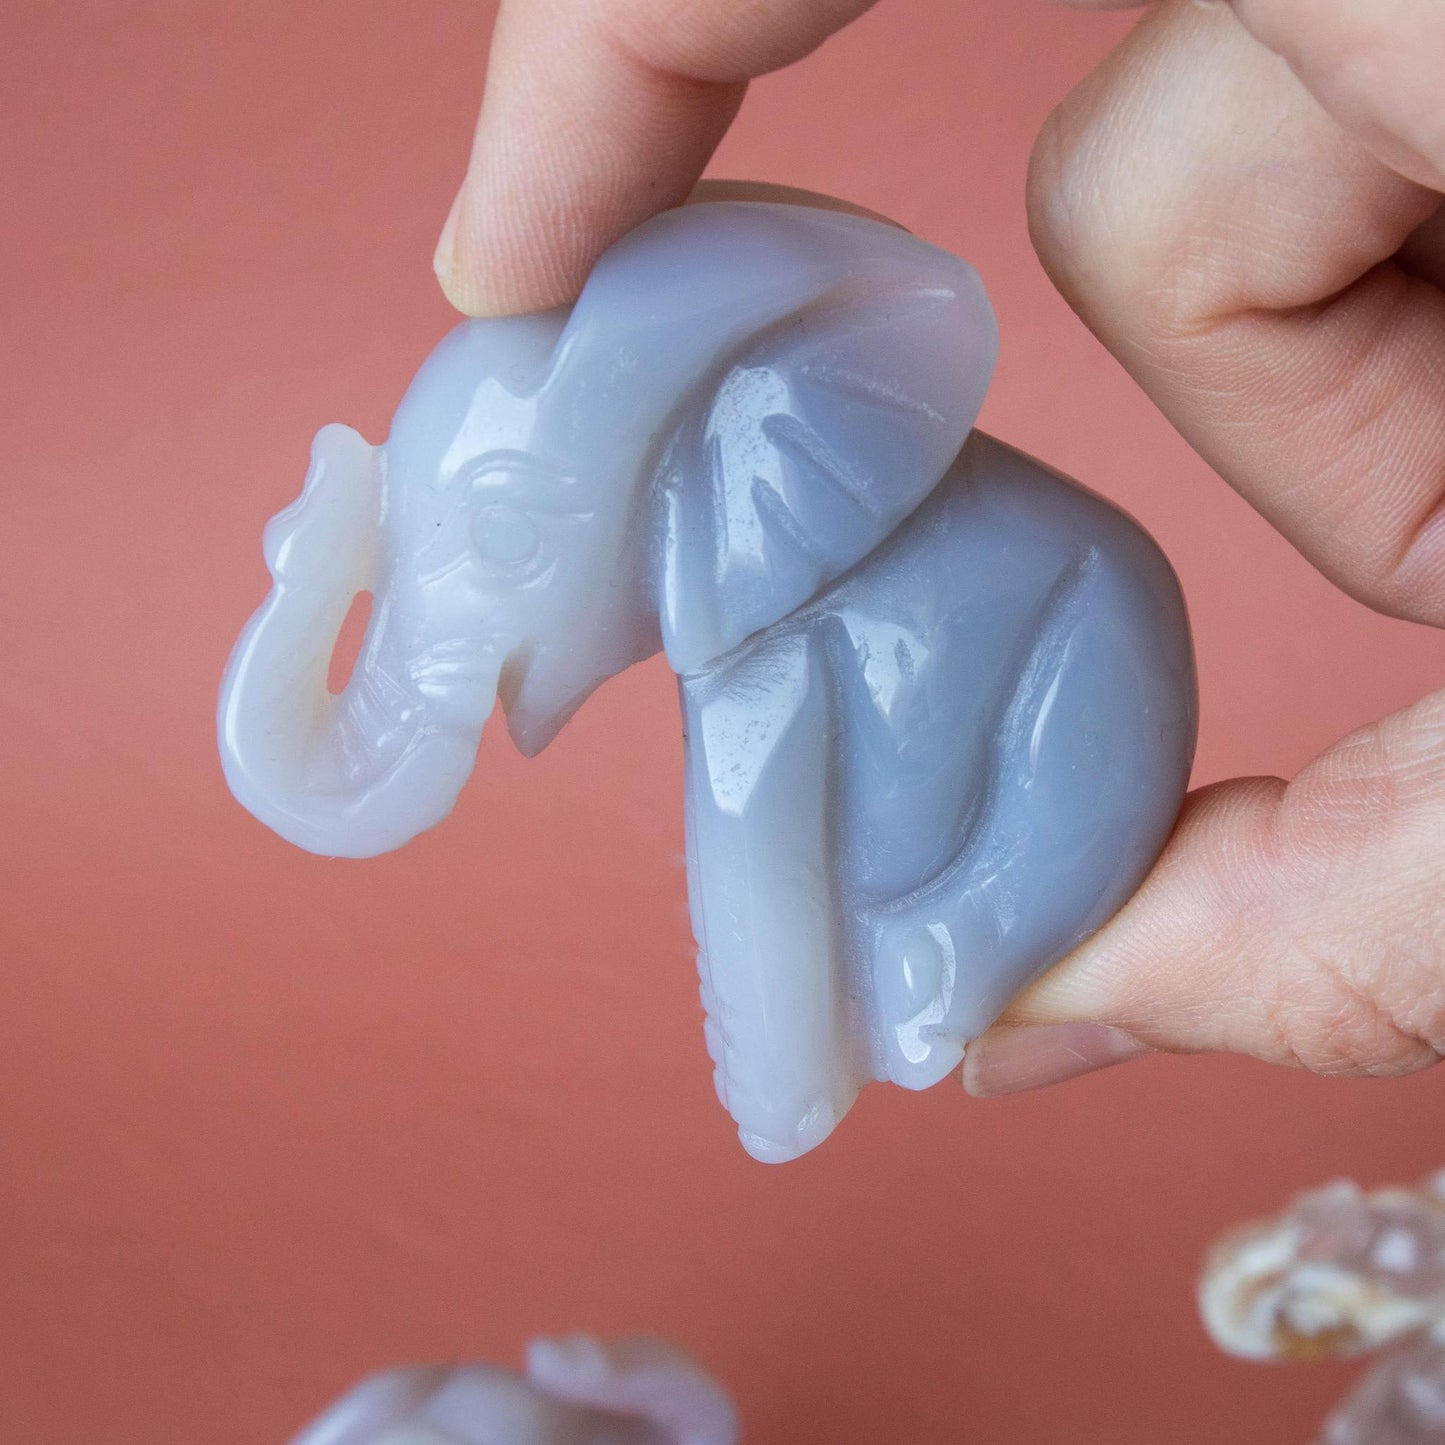 chalcedony, chalcedony elephant, chalcedony elephant carving, chalcedony crystal, chalcedony stone, chalcedony healing properties, chalcedony properties, chalcedony meaning